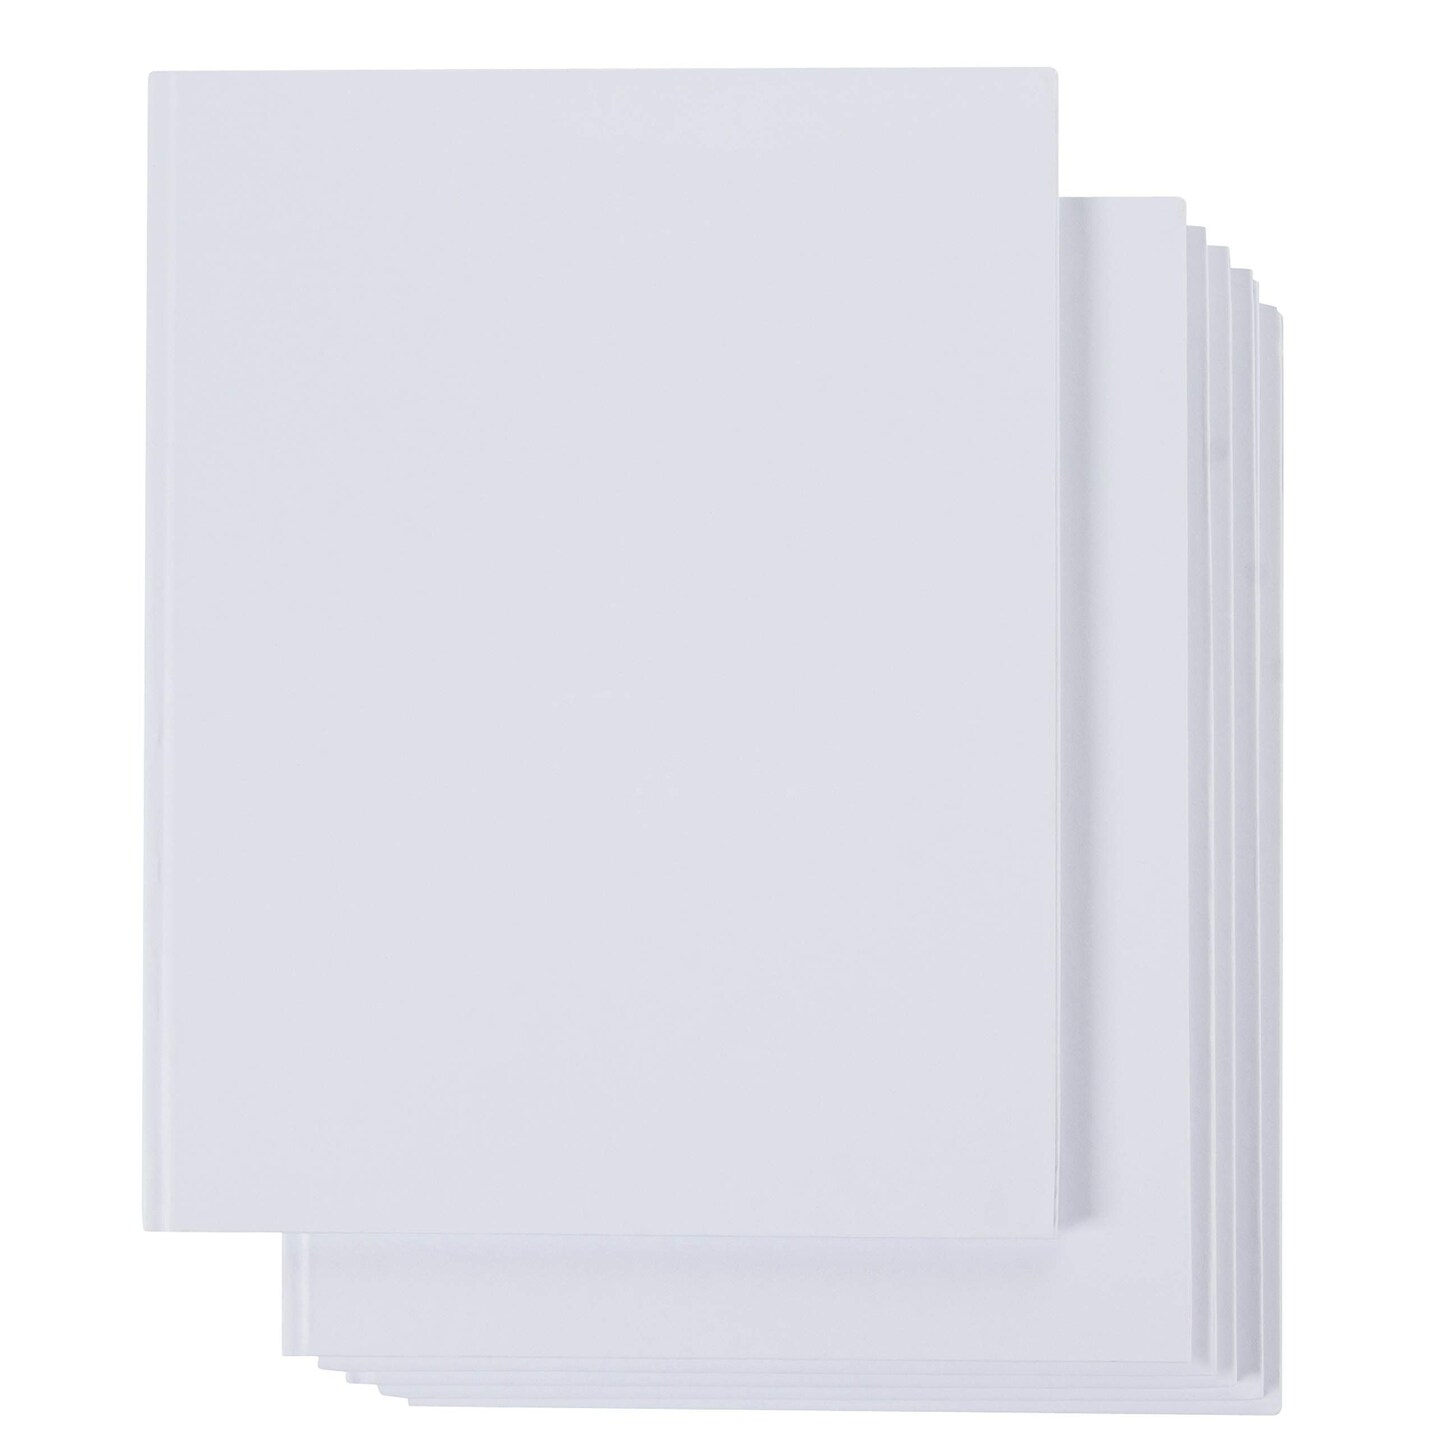 Paper Junkie White Hardcover Blank Books for Kids to Write Stories